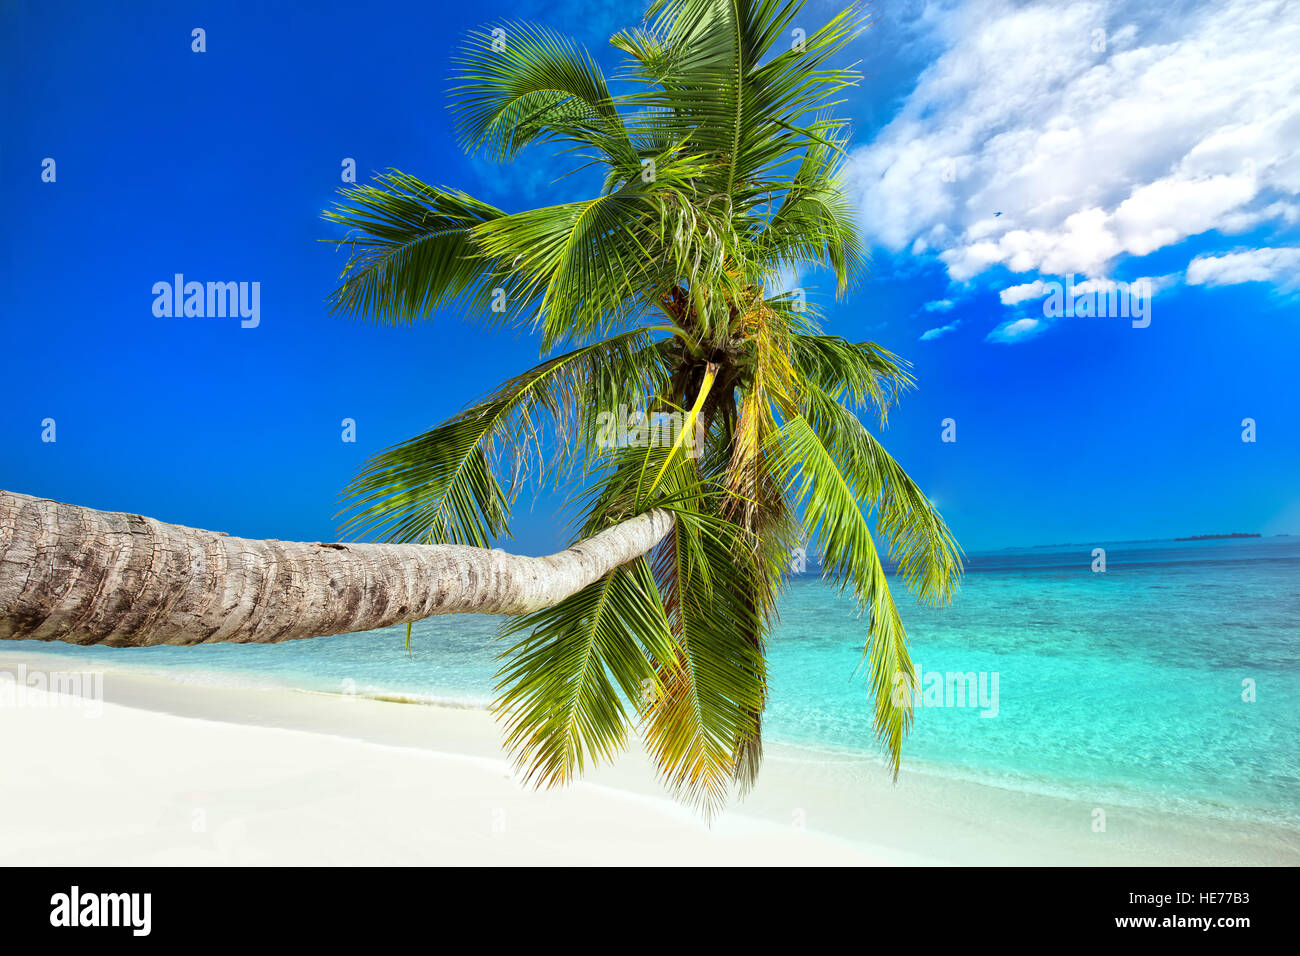 Palm tree on tropical island with turquoise clear water. Stock Photo